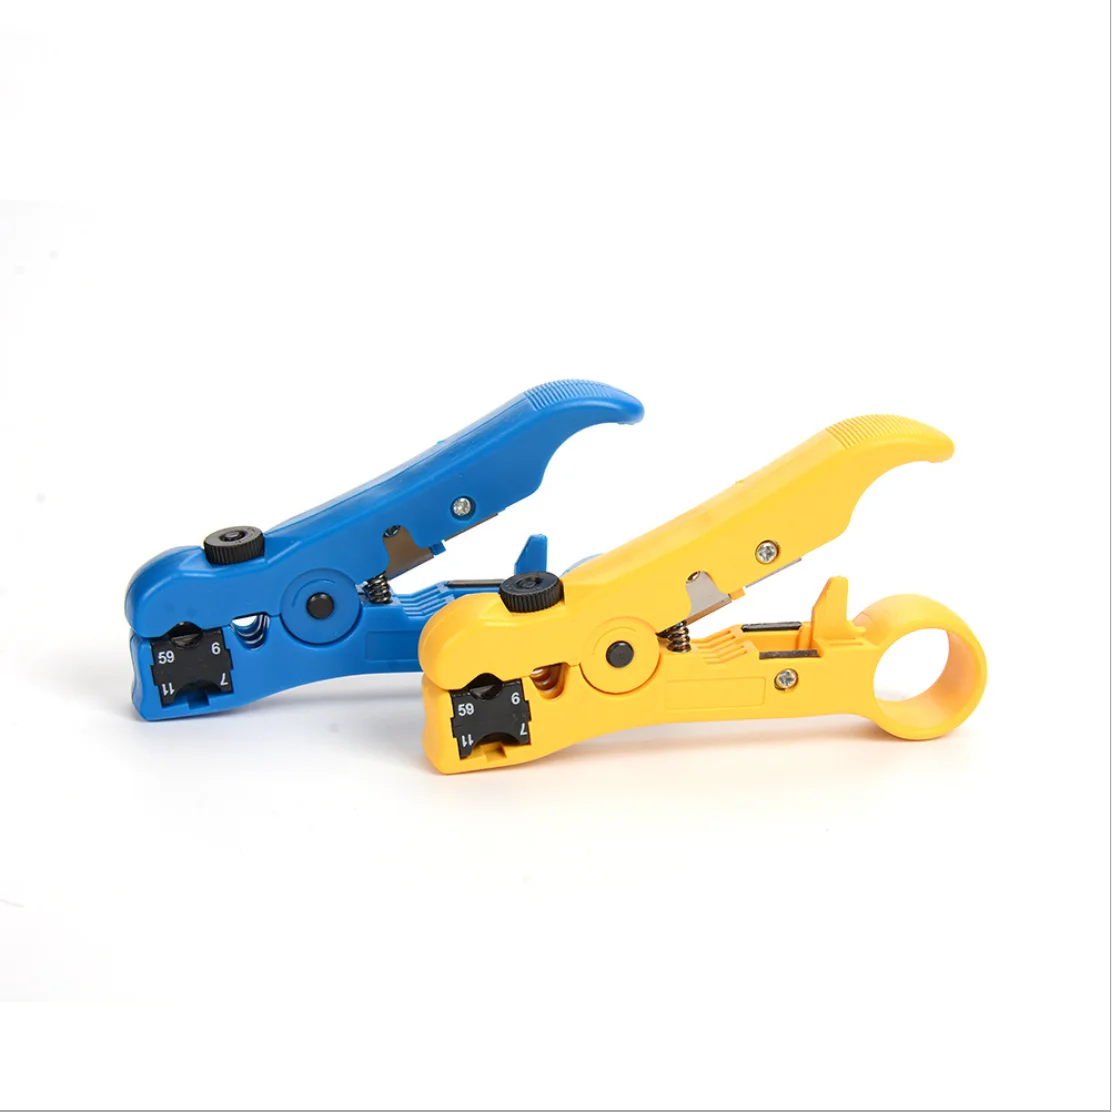 Rotary Coax Coaxial Cable Wire Cutter Stripping Tool RG59 RG6 RG7 RG11 Stripper 